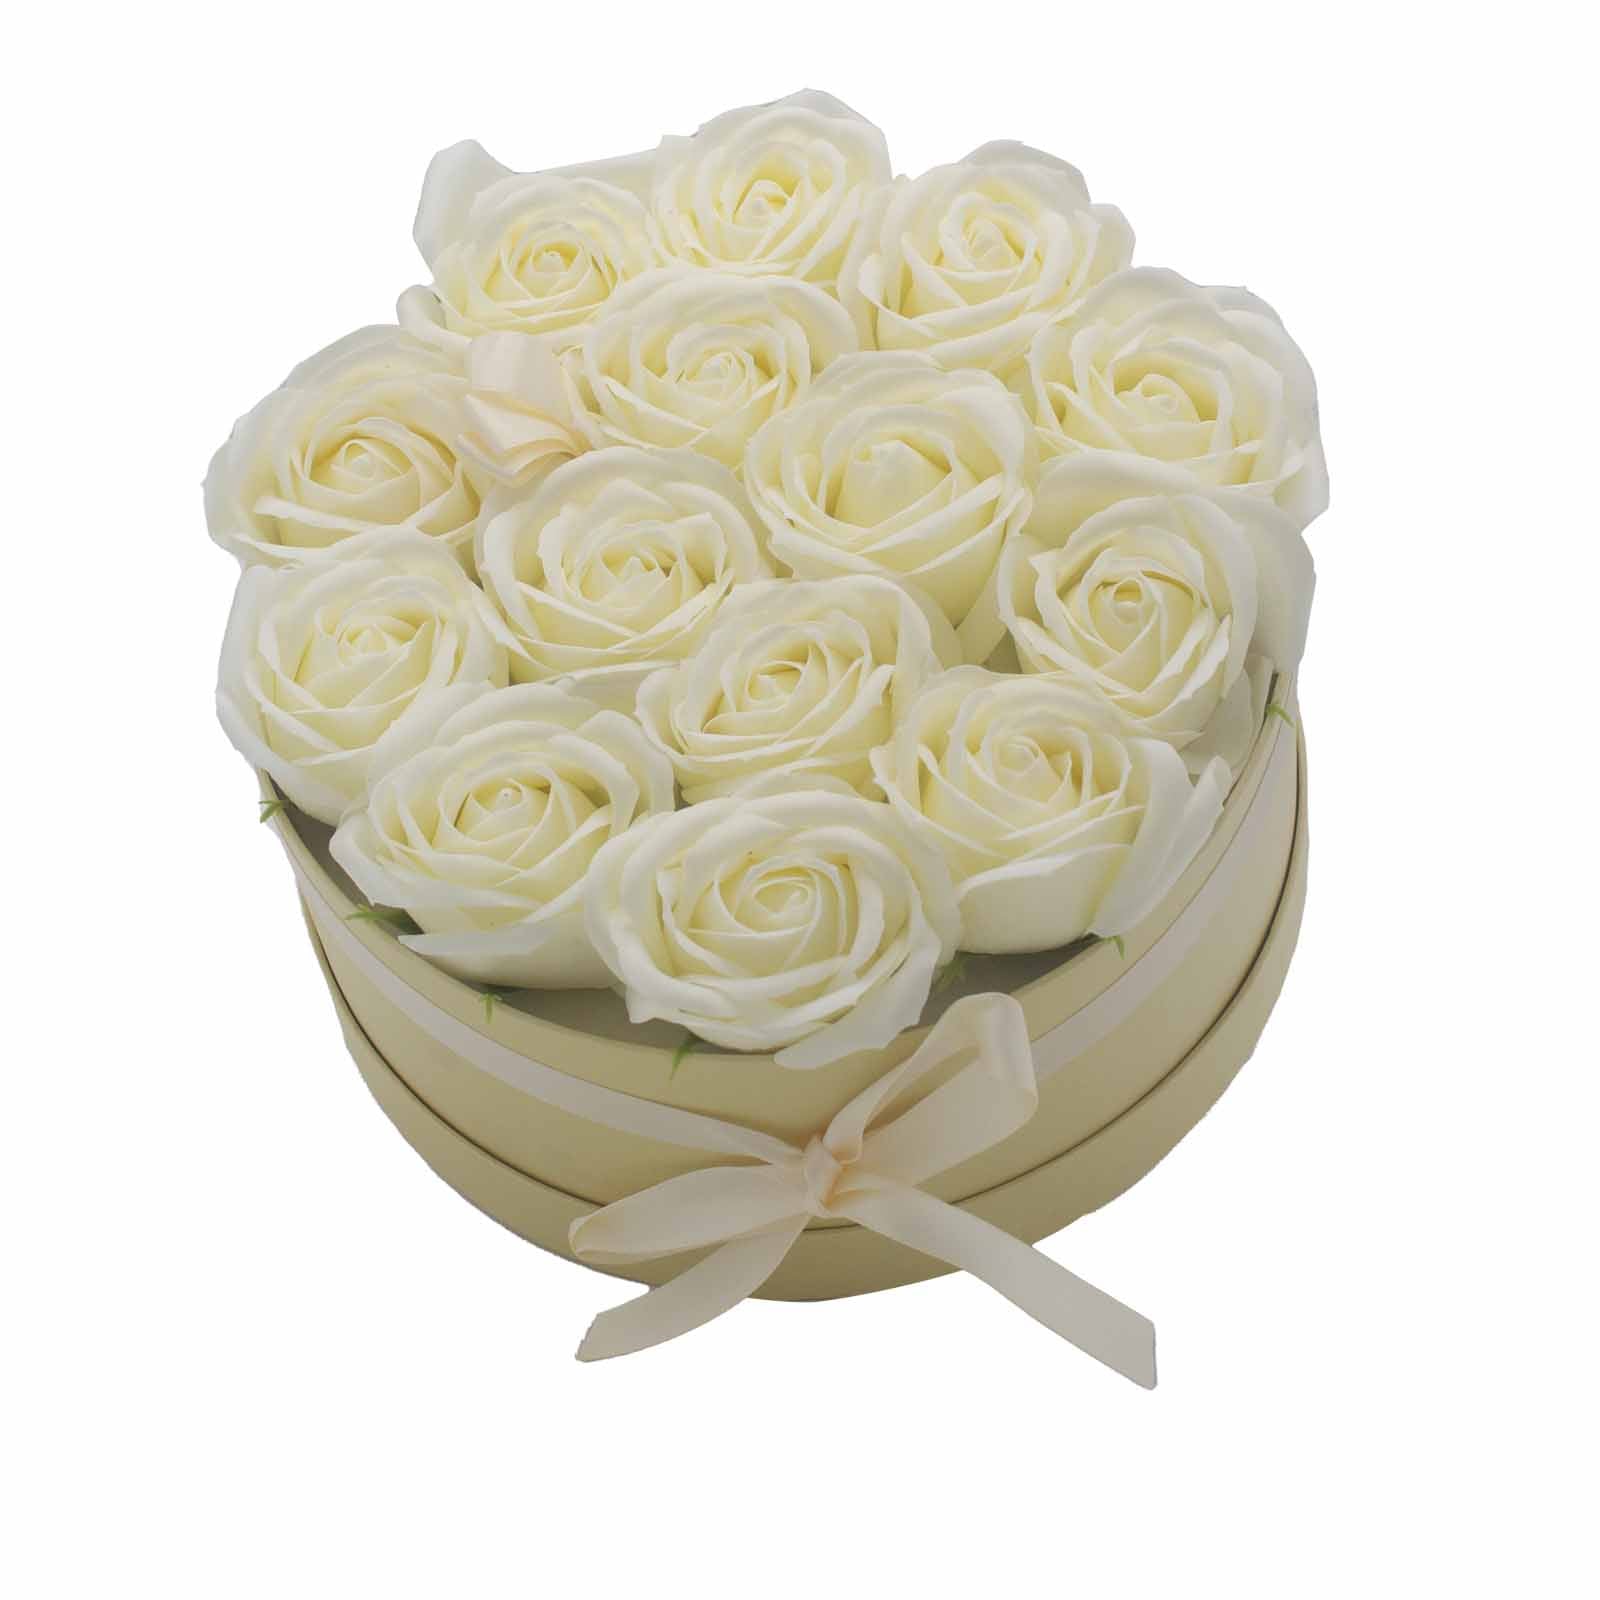 View Soap Flower Gift Bouquet 14 Cream Roses Round information